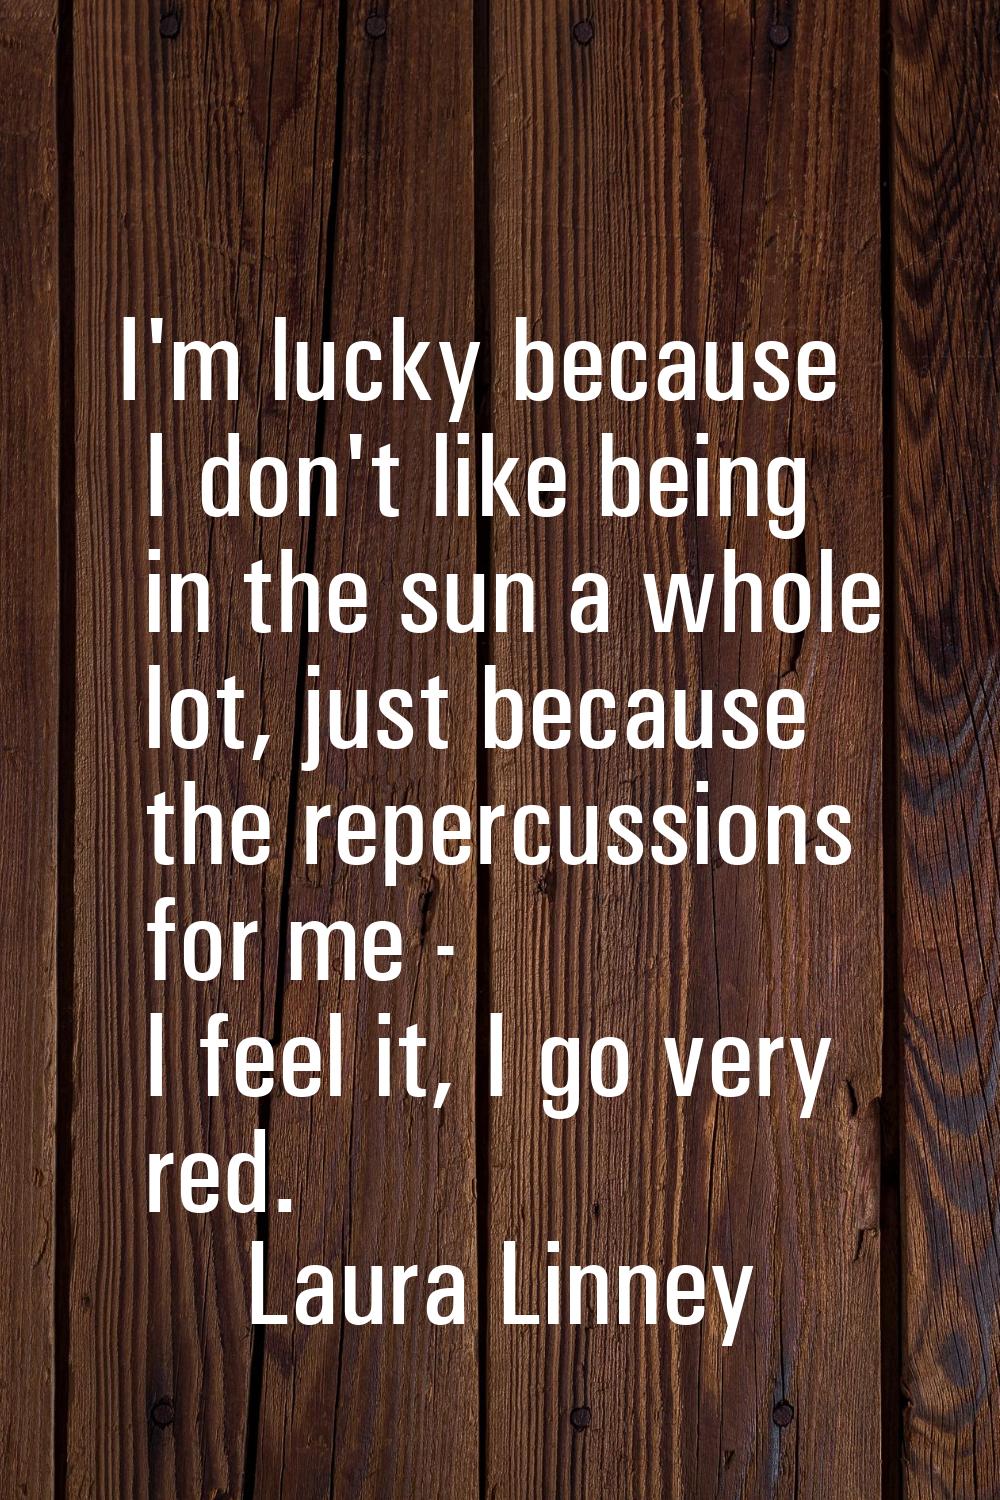 I'm lucky because I don't like being in the sun a whole lot, just because the repercussions for me 